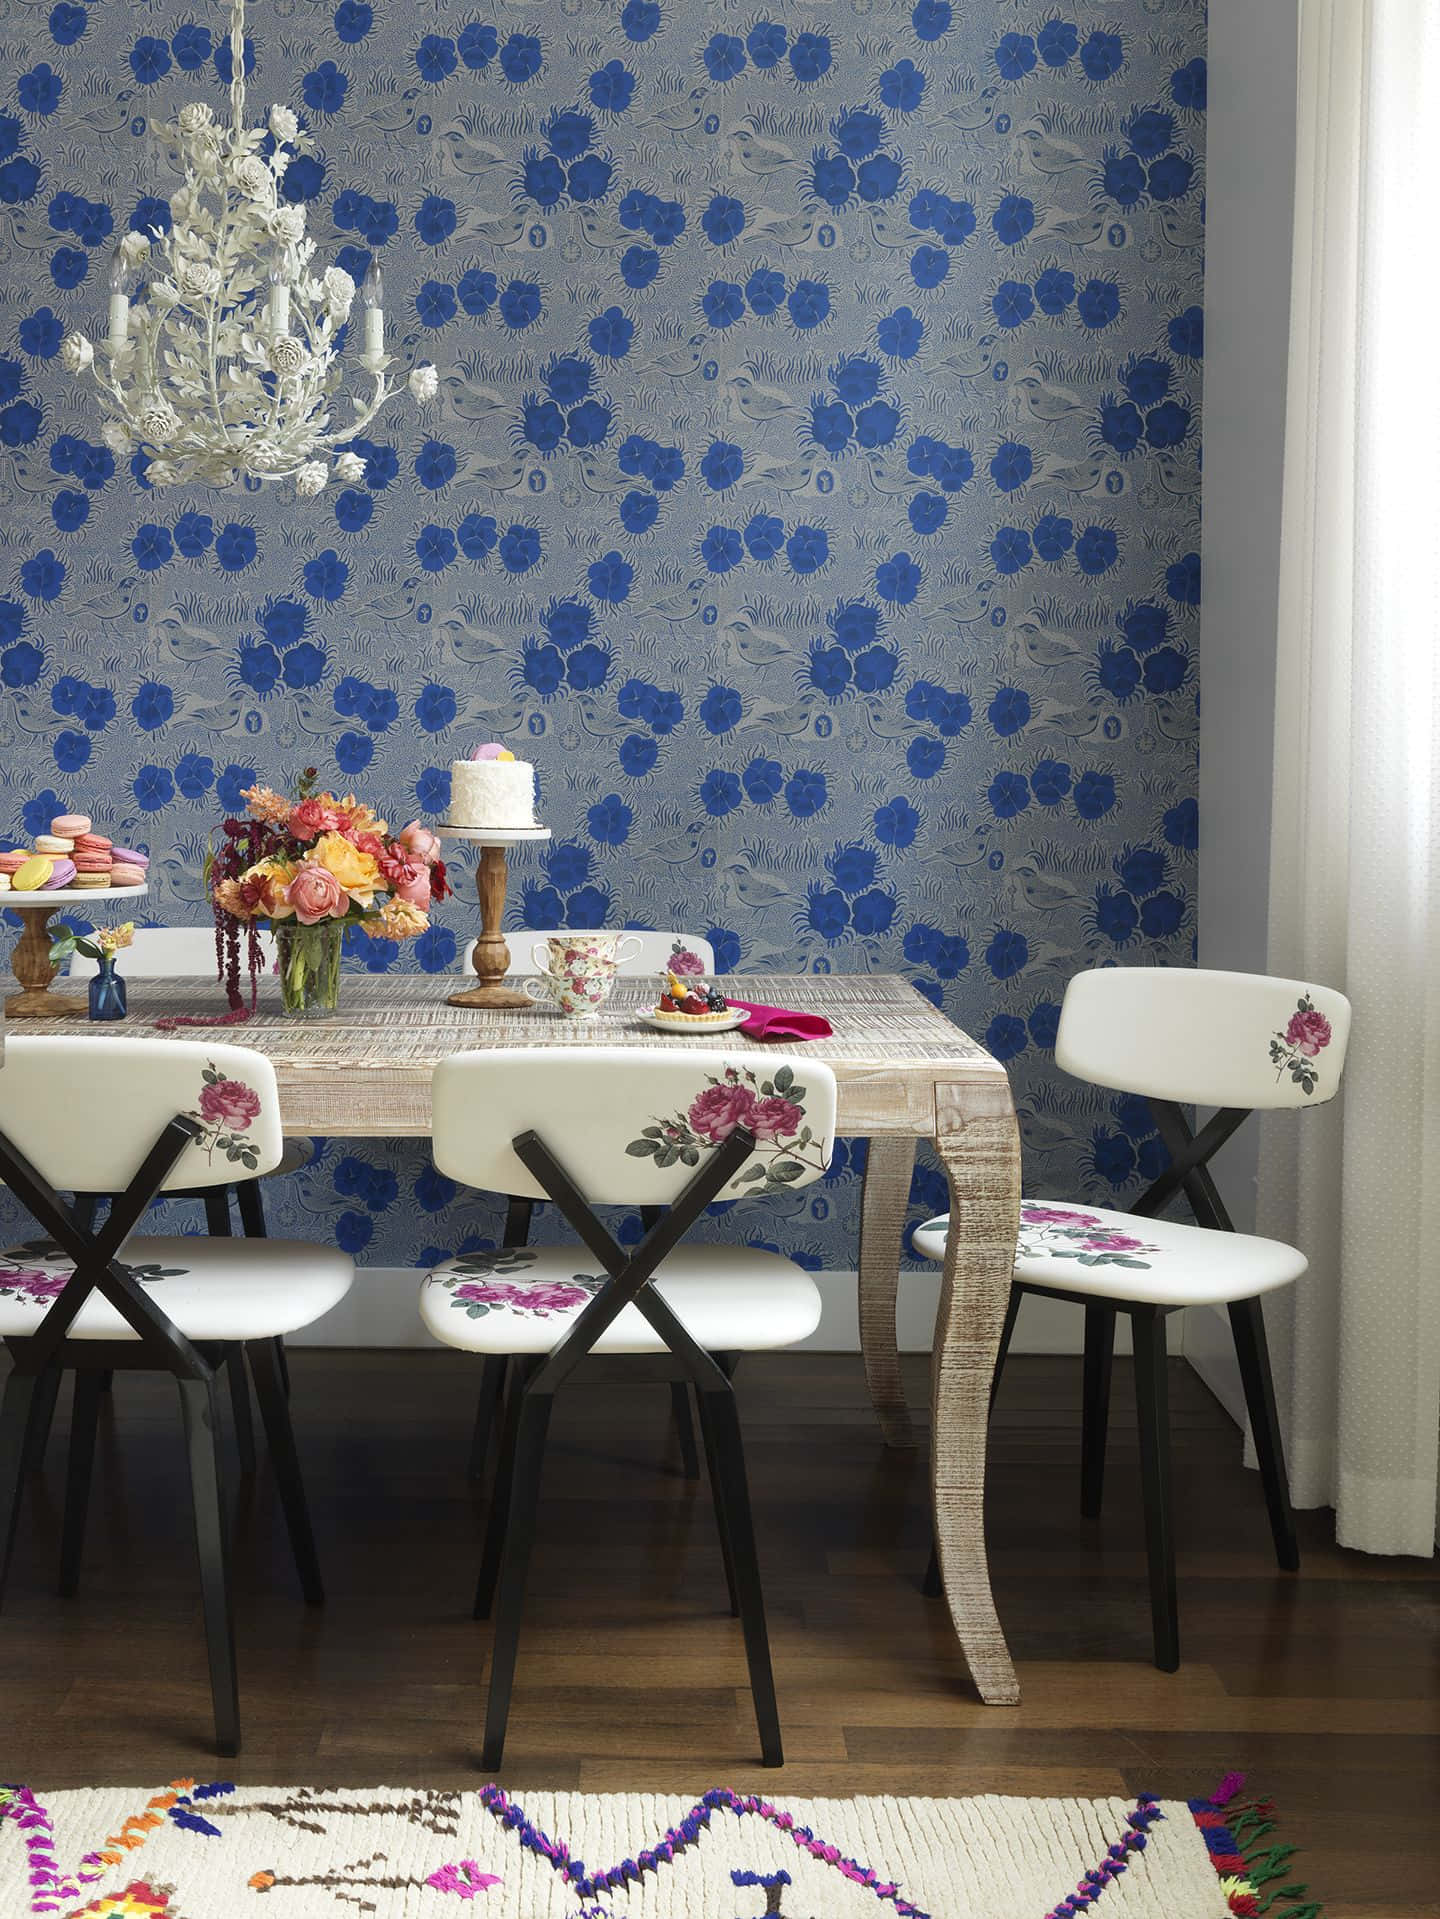 Dining Room With White Floral Chairs Picture